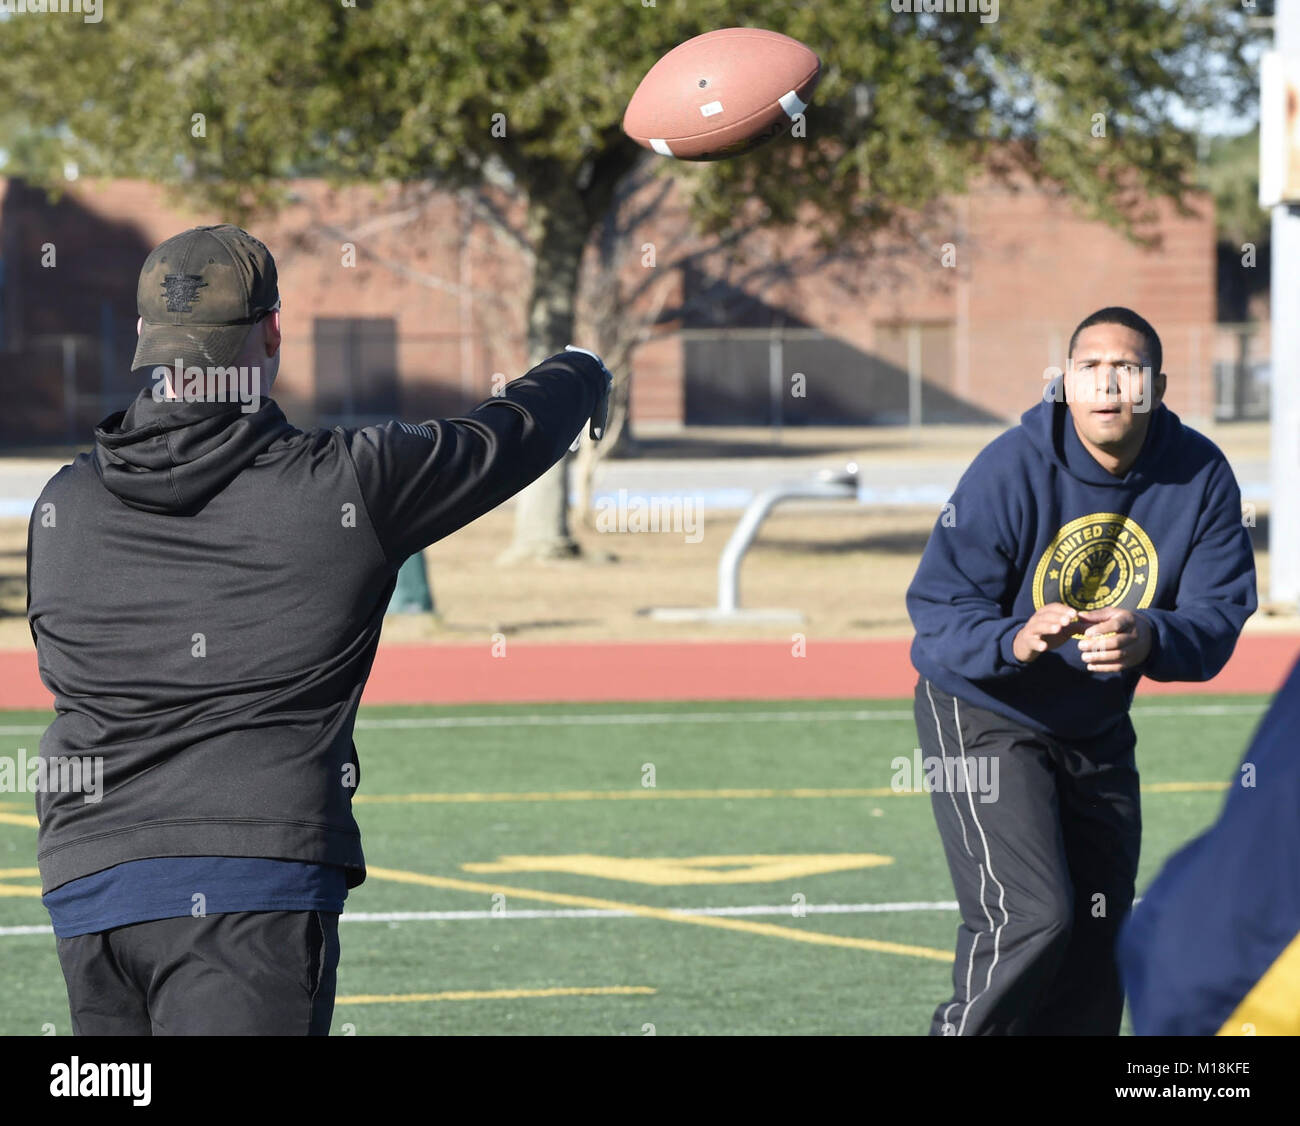 Fla. (Jan. 25, 2018) Center for Information Warfare Training (CIWT) staff participate in an Ultimate Football physical fitness session on board Naval Air Station Pensacola Corry Station, Florida. CIWT staff takes physical fitness seriously and regularly trains together to strengthen teamwork and maintain readiness. (U.S. Navy Stock Photo